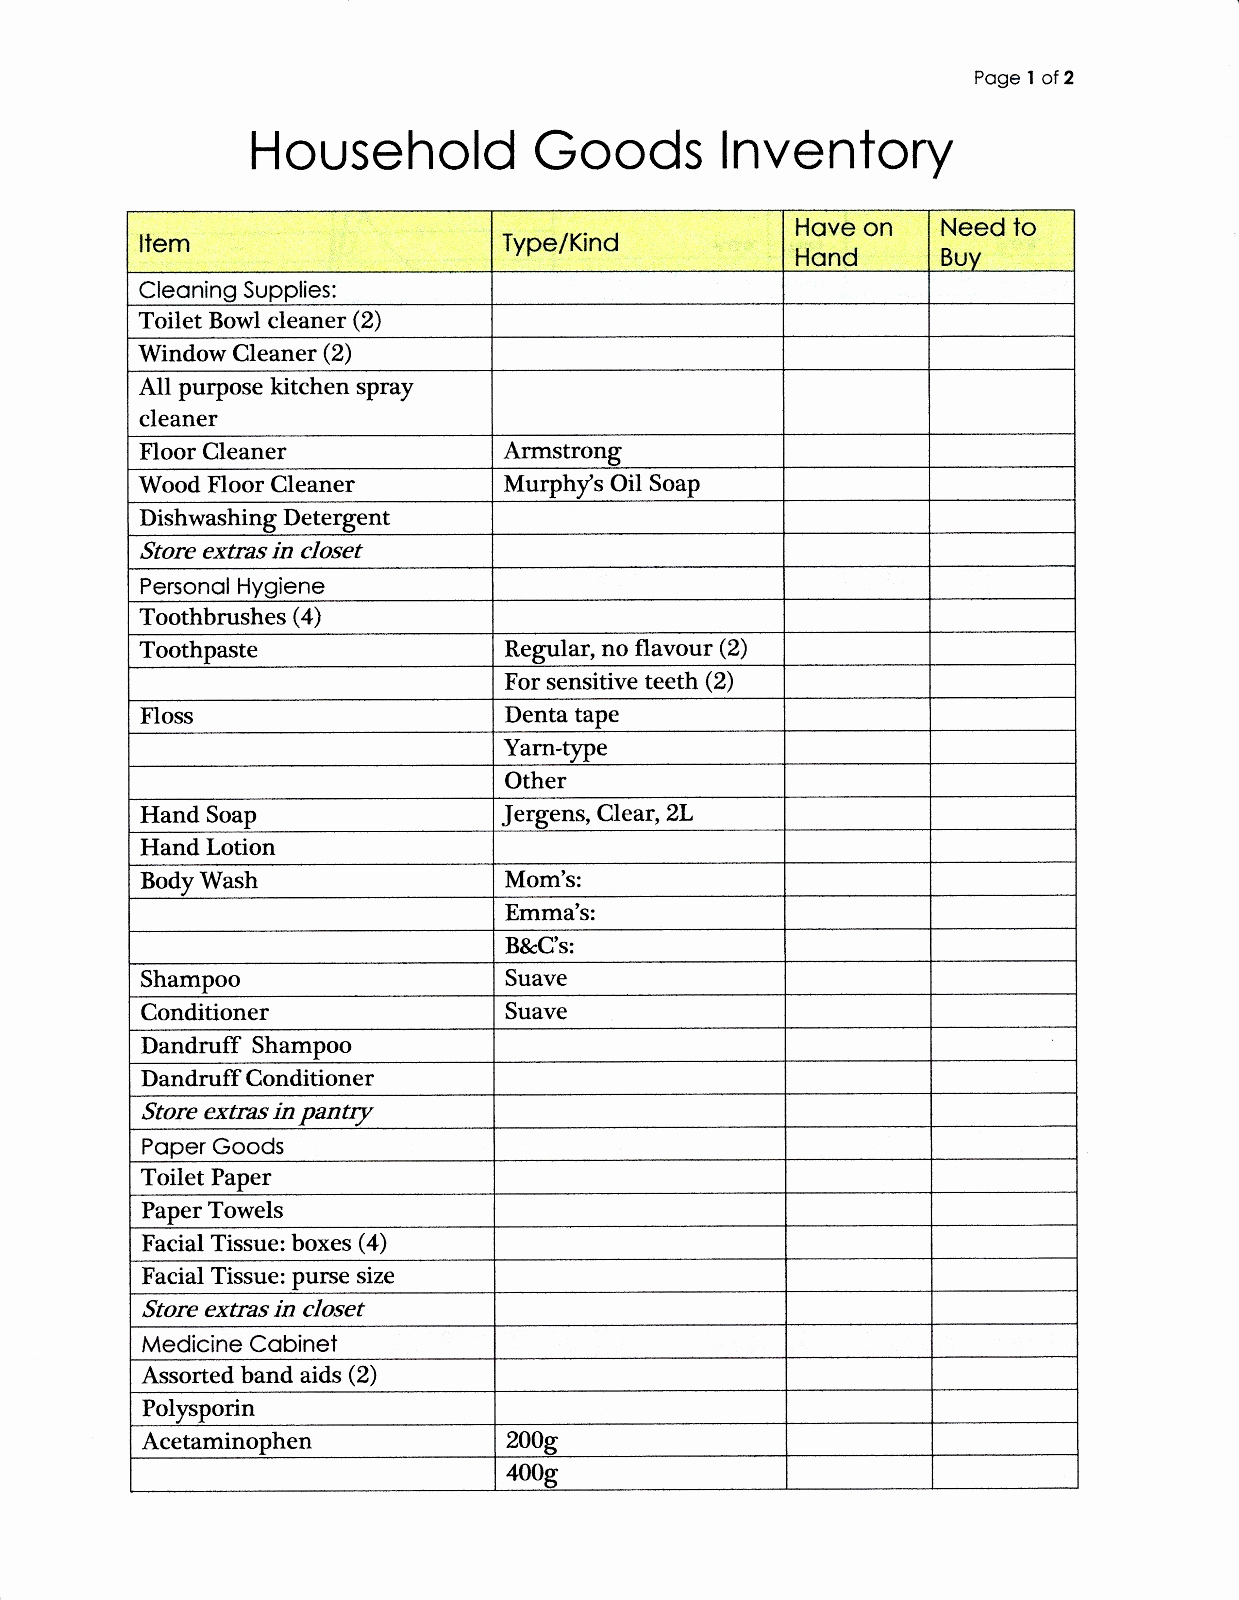 Linen Inventory Spreadsheet New Housekeeping Linen Inventory with